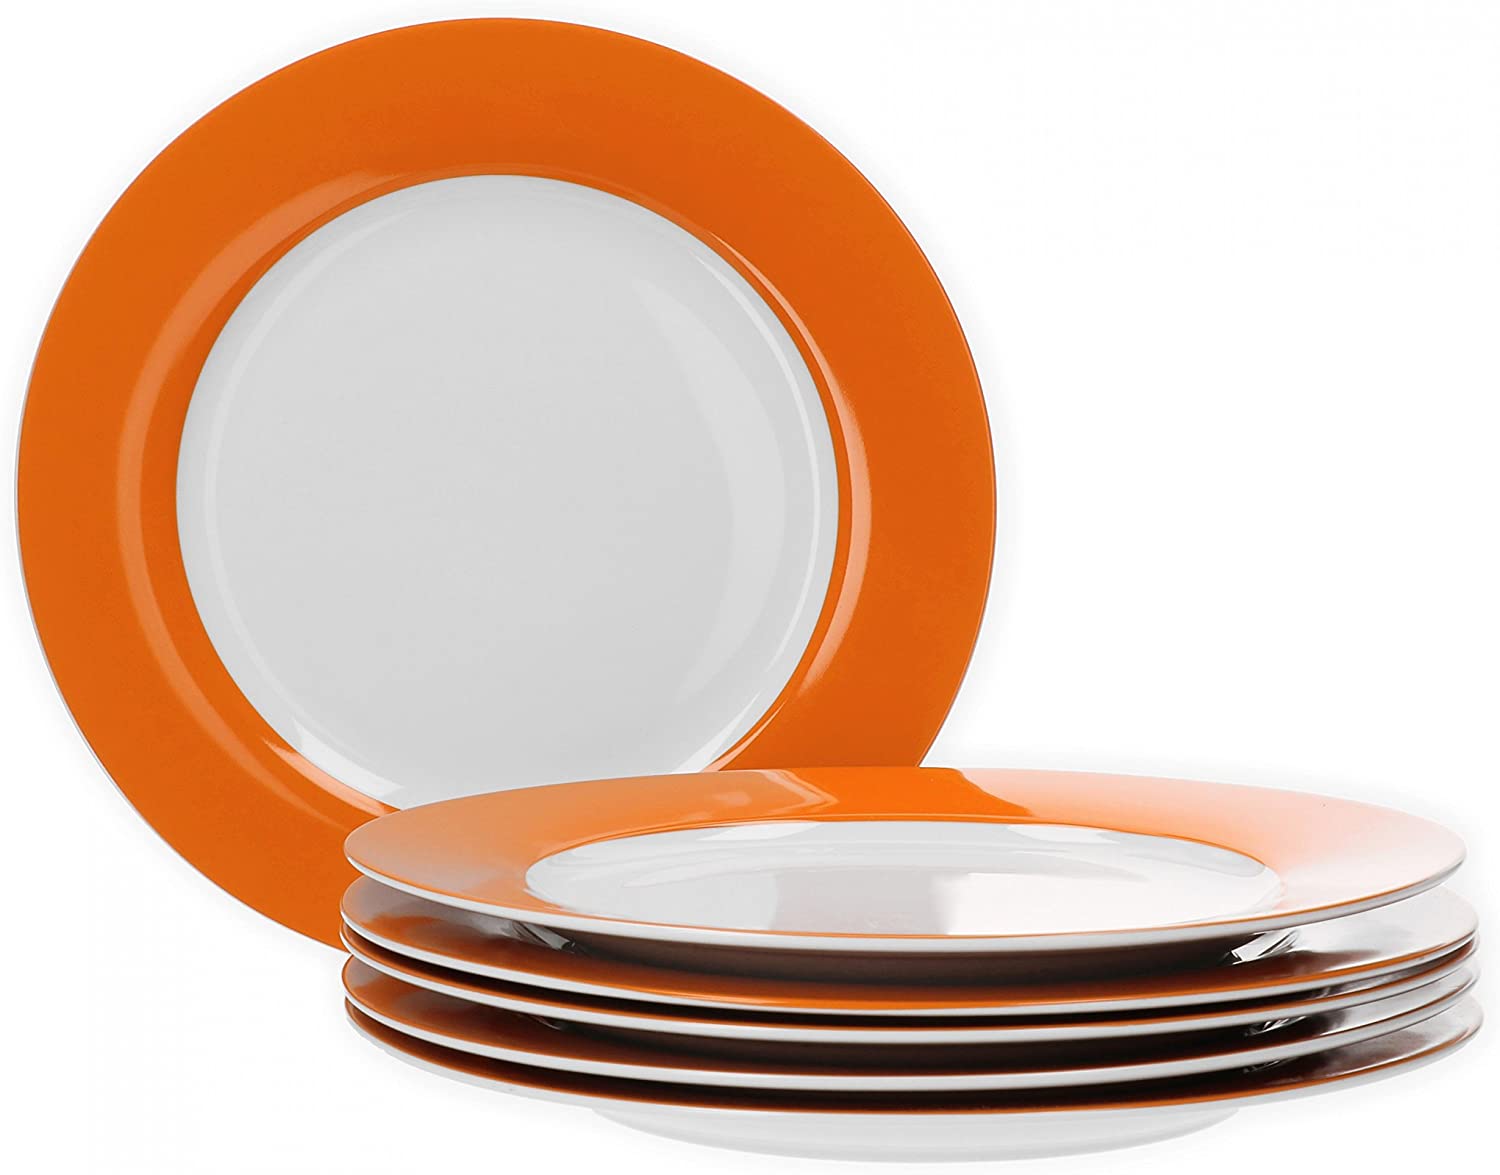 Van Well Vario Dinner Plate Set 6 Pieces I Dinner Service for 6 People I Flat Dining Plate with Diameter 26.5 cm I Porcelain Service White with Orange Rim I Plate Set Microwave Safe